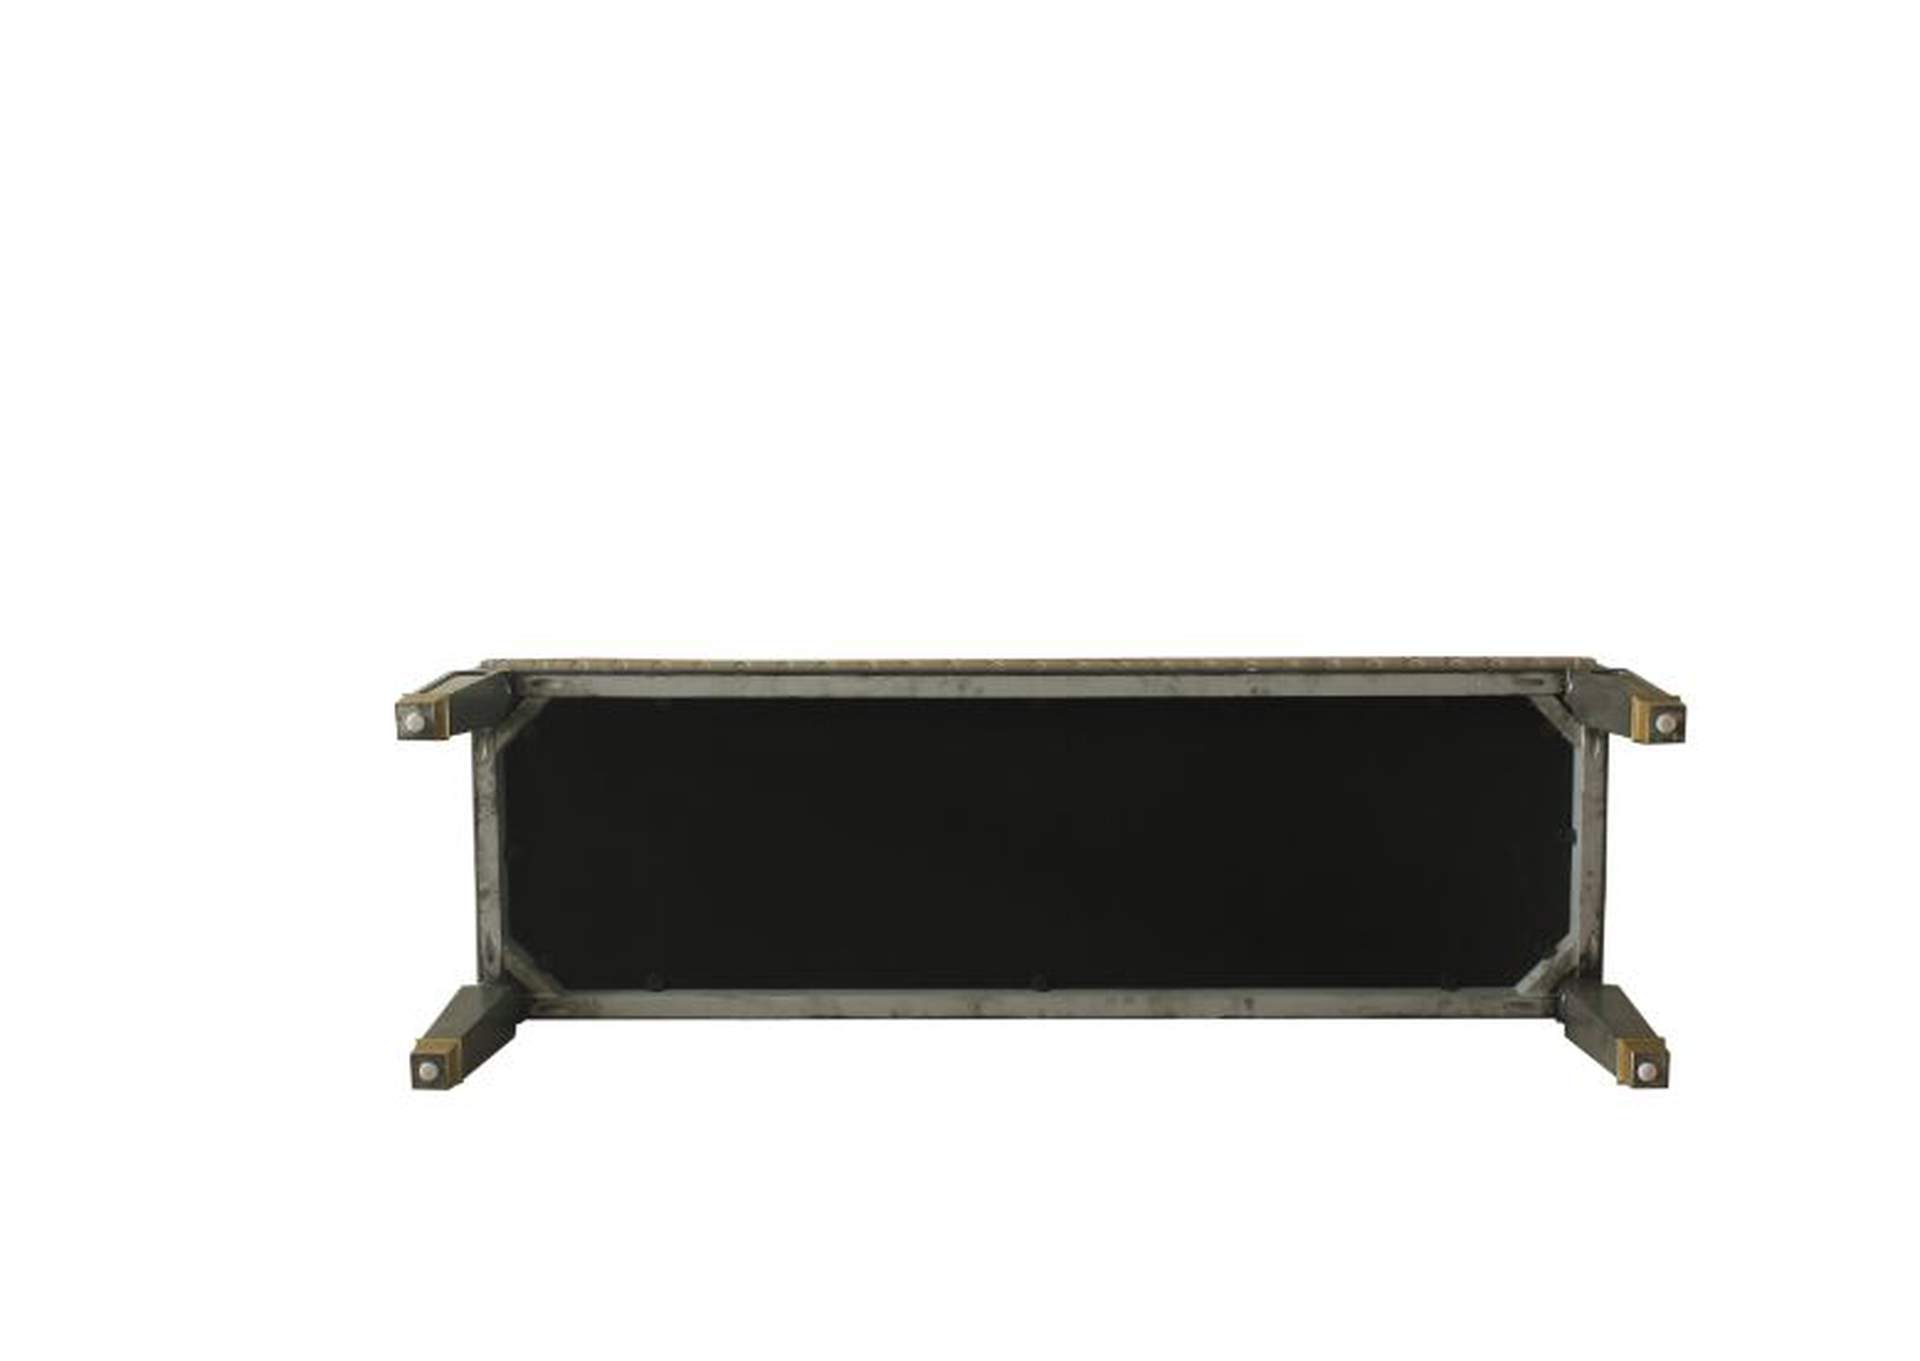 House Marchese Bench,Acme